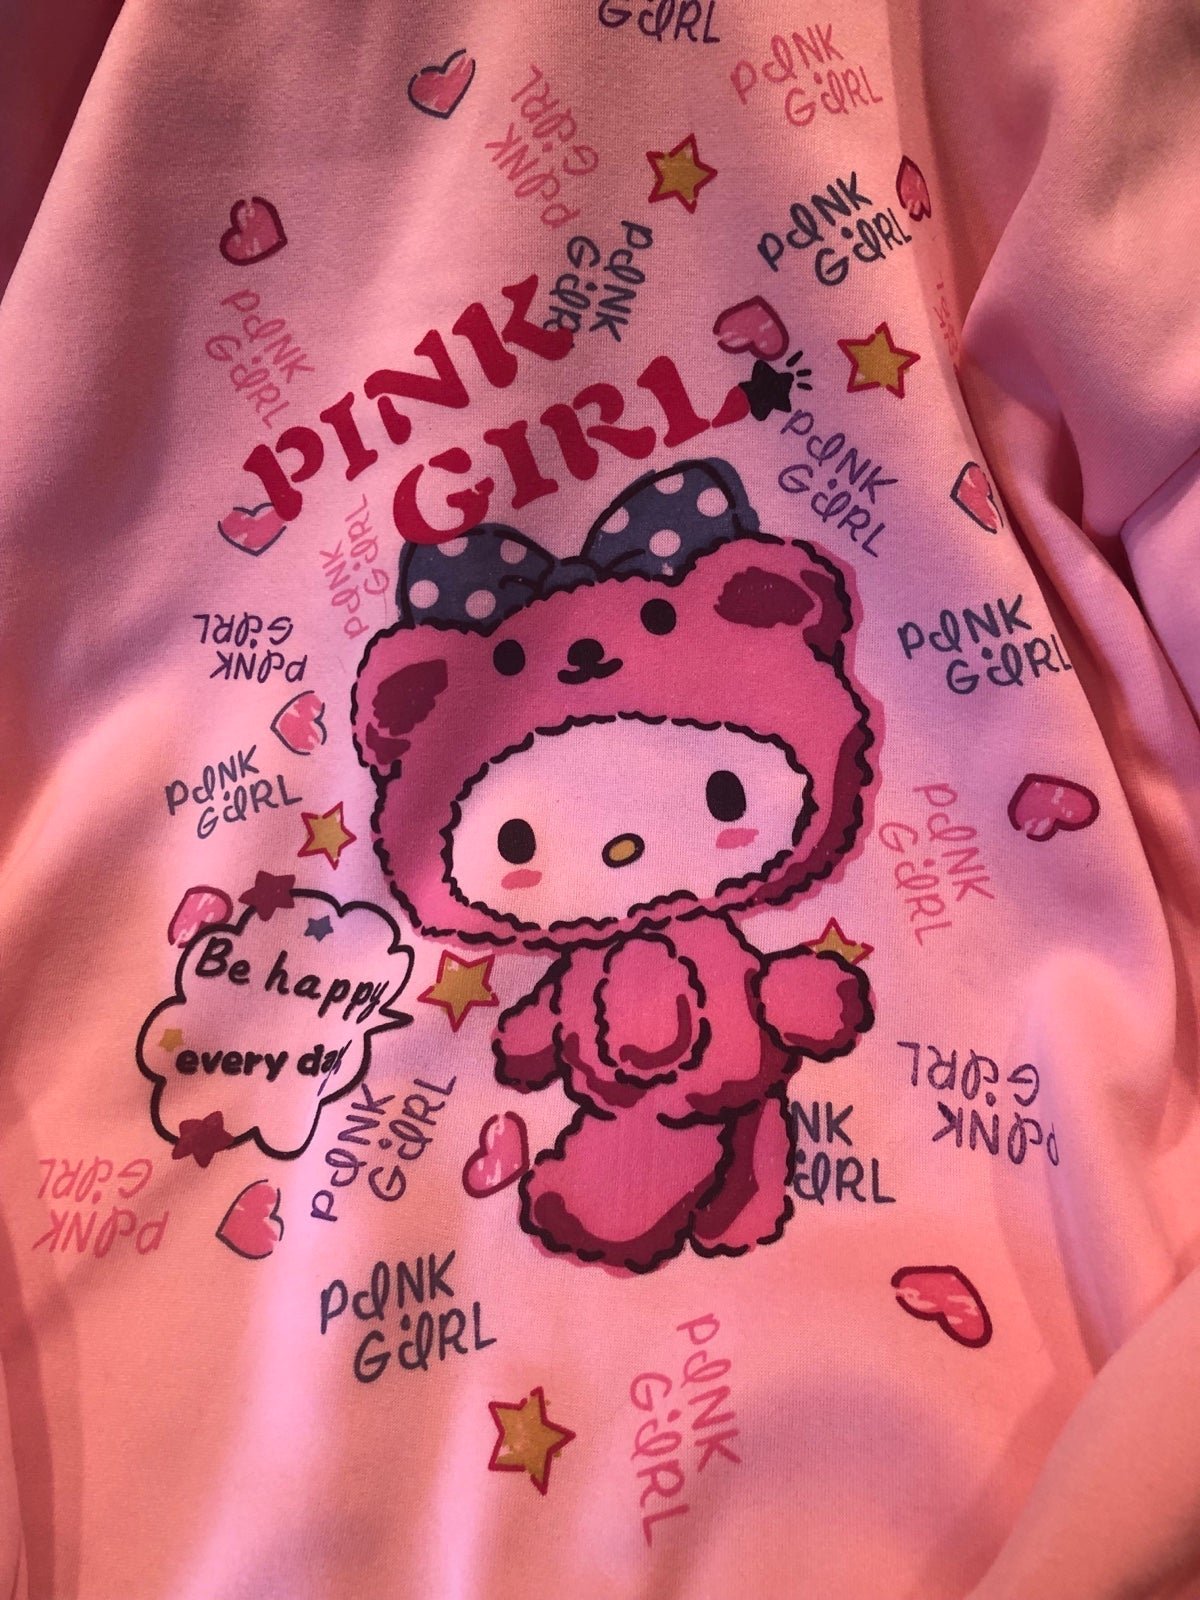 Great Hello Kitty PINK GIRL sweatshirt 5x FsS5arDLE Everyday Low Prices